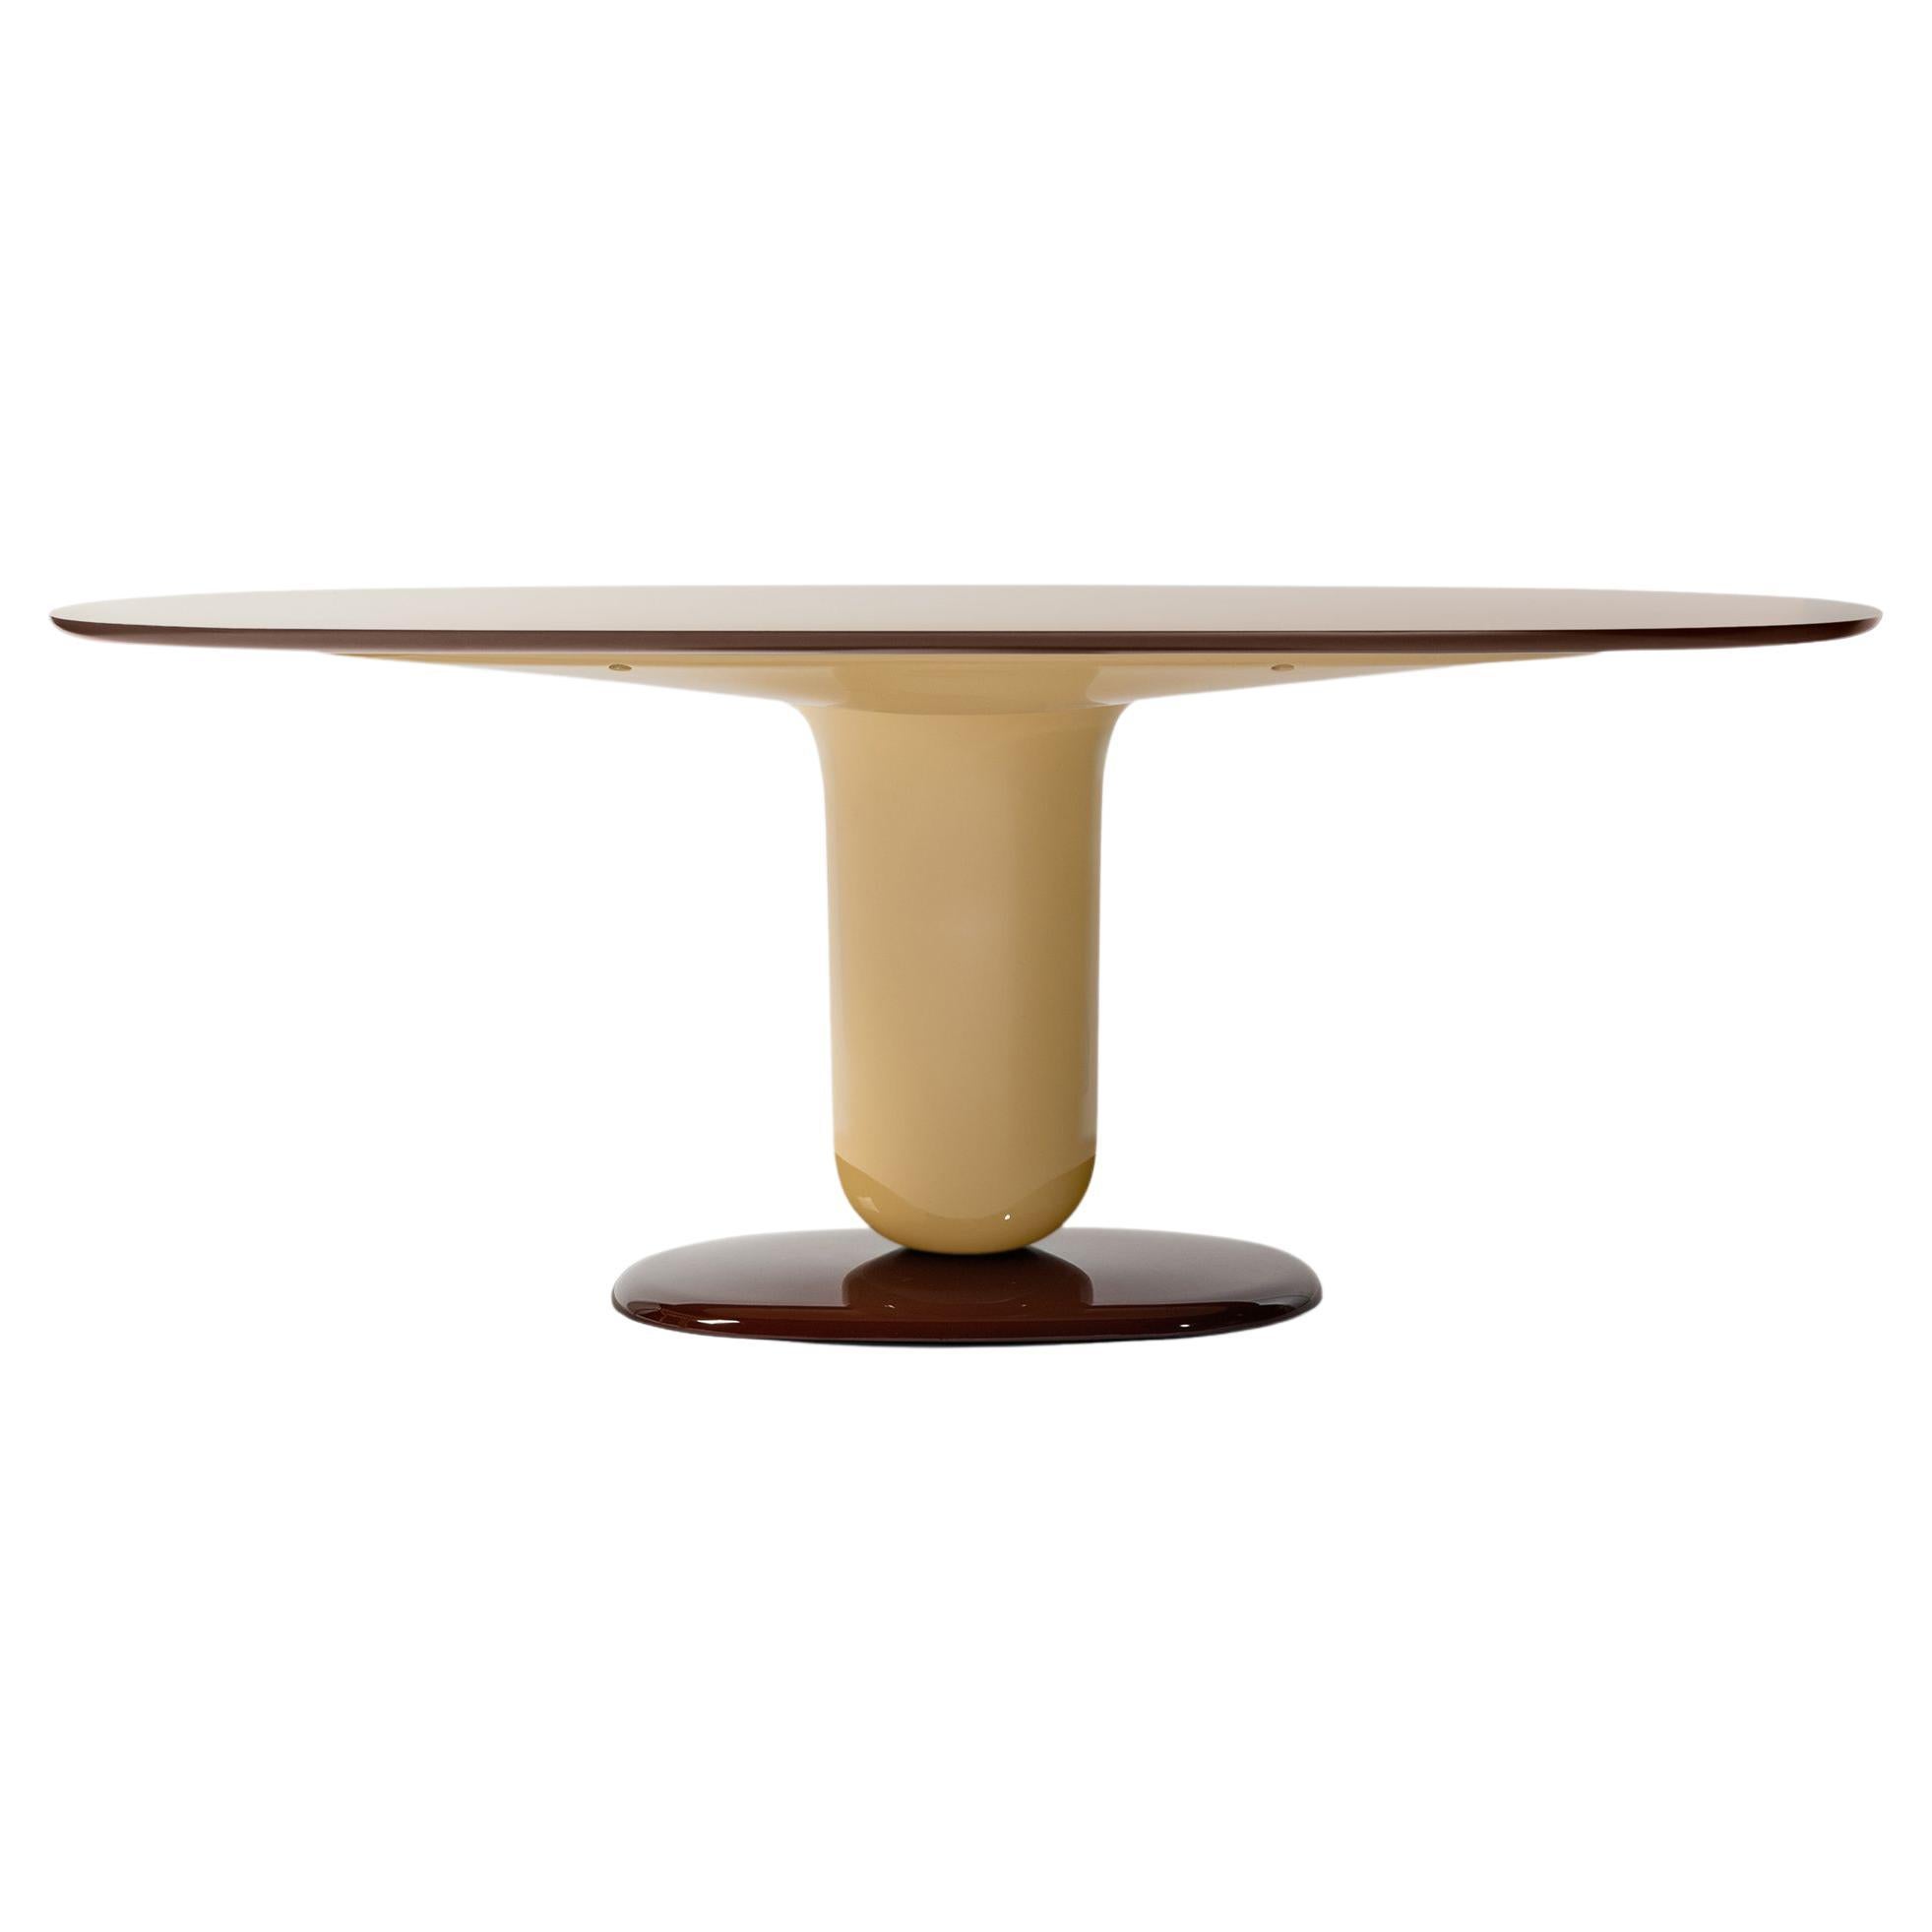 Table designed by Jaime Hayon in 2021, added to the Explorer collection that started in 2019.
Manufactured by BD Barcelona in Spain.

As a continuation of the playful Explorer Table series and following its elegant beauty, we are proud to